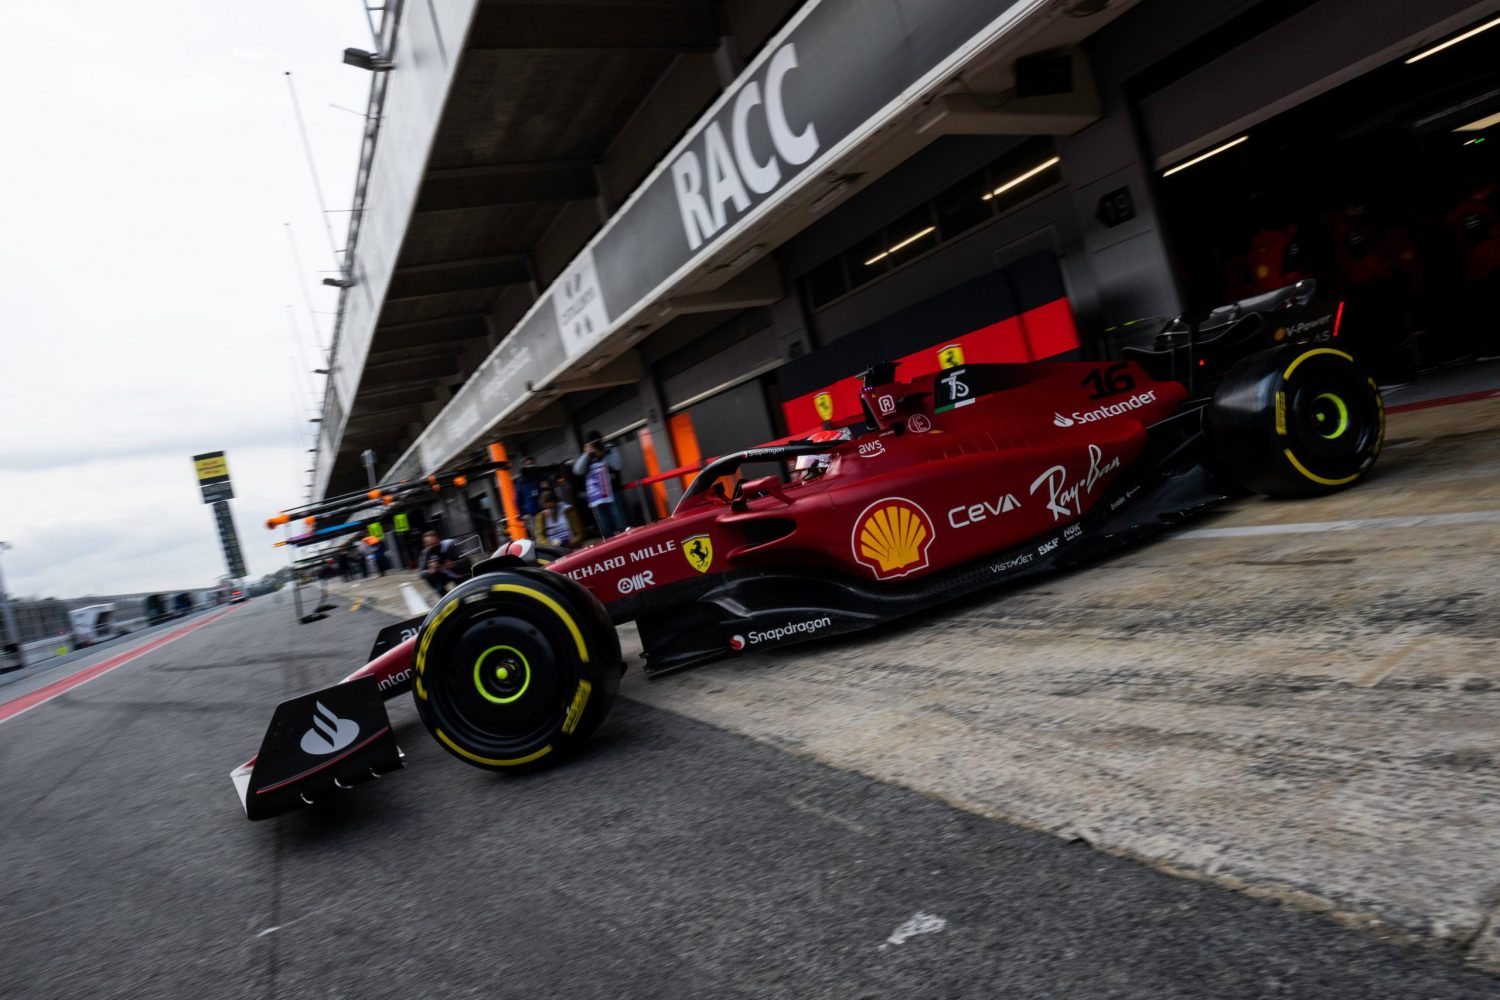 Ferrari hails 'solid' first test but expects 'intense fight' up ahead